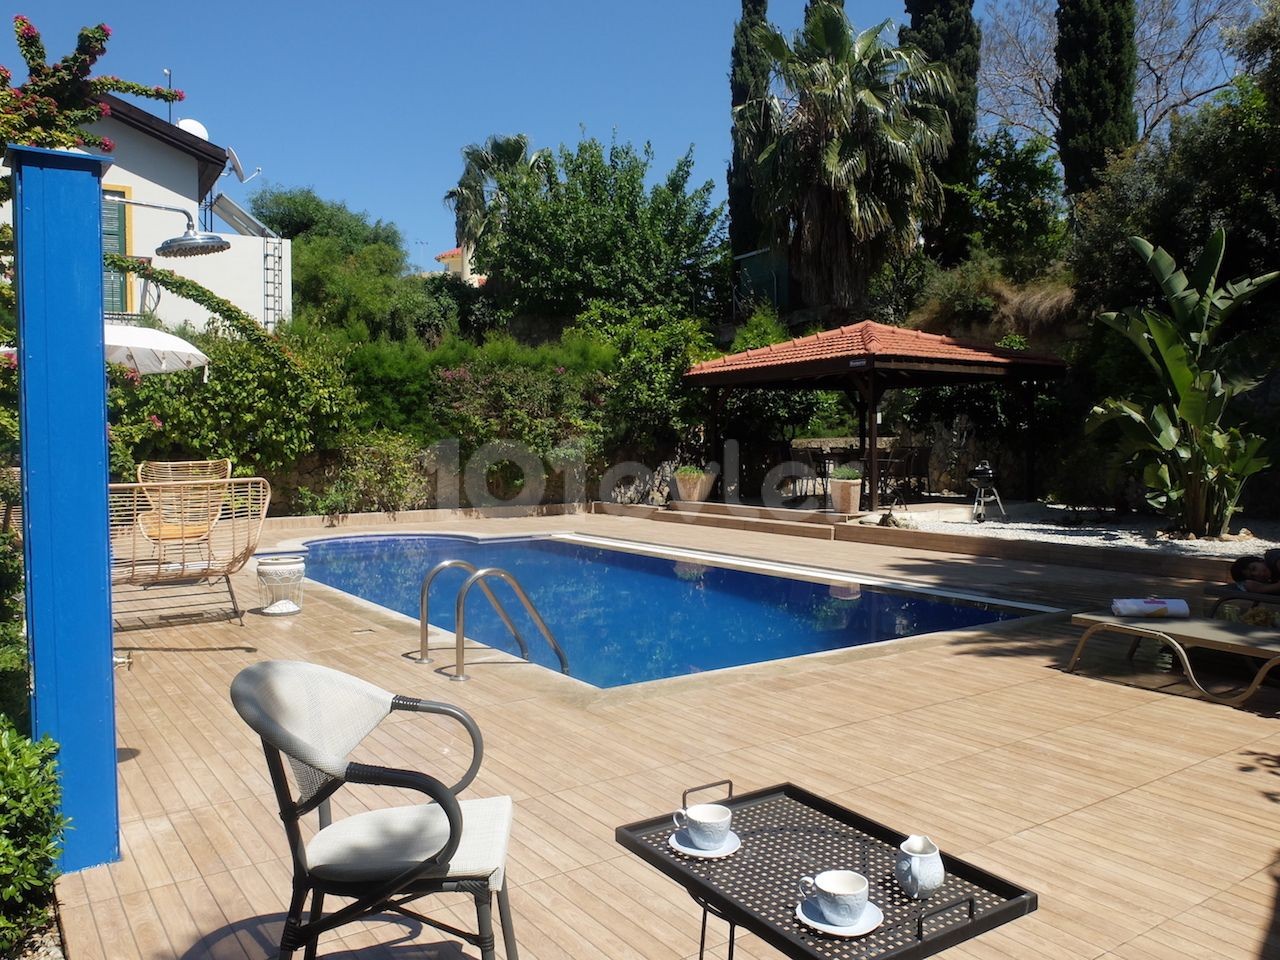 Stunning 4 bedroom luxury villa for sale set in the tranquil Catalkoy